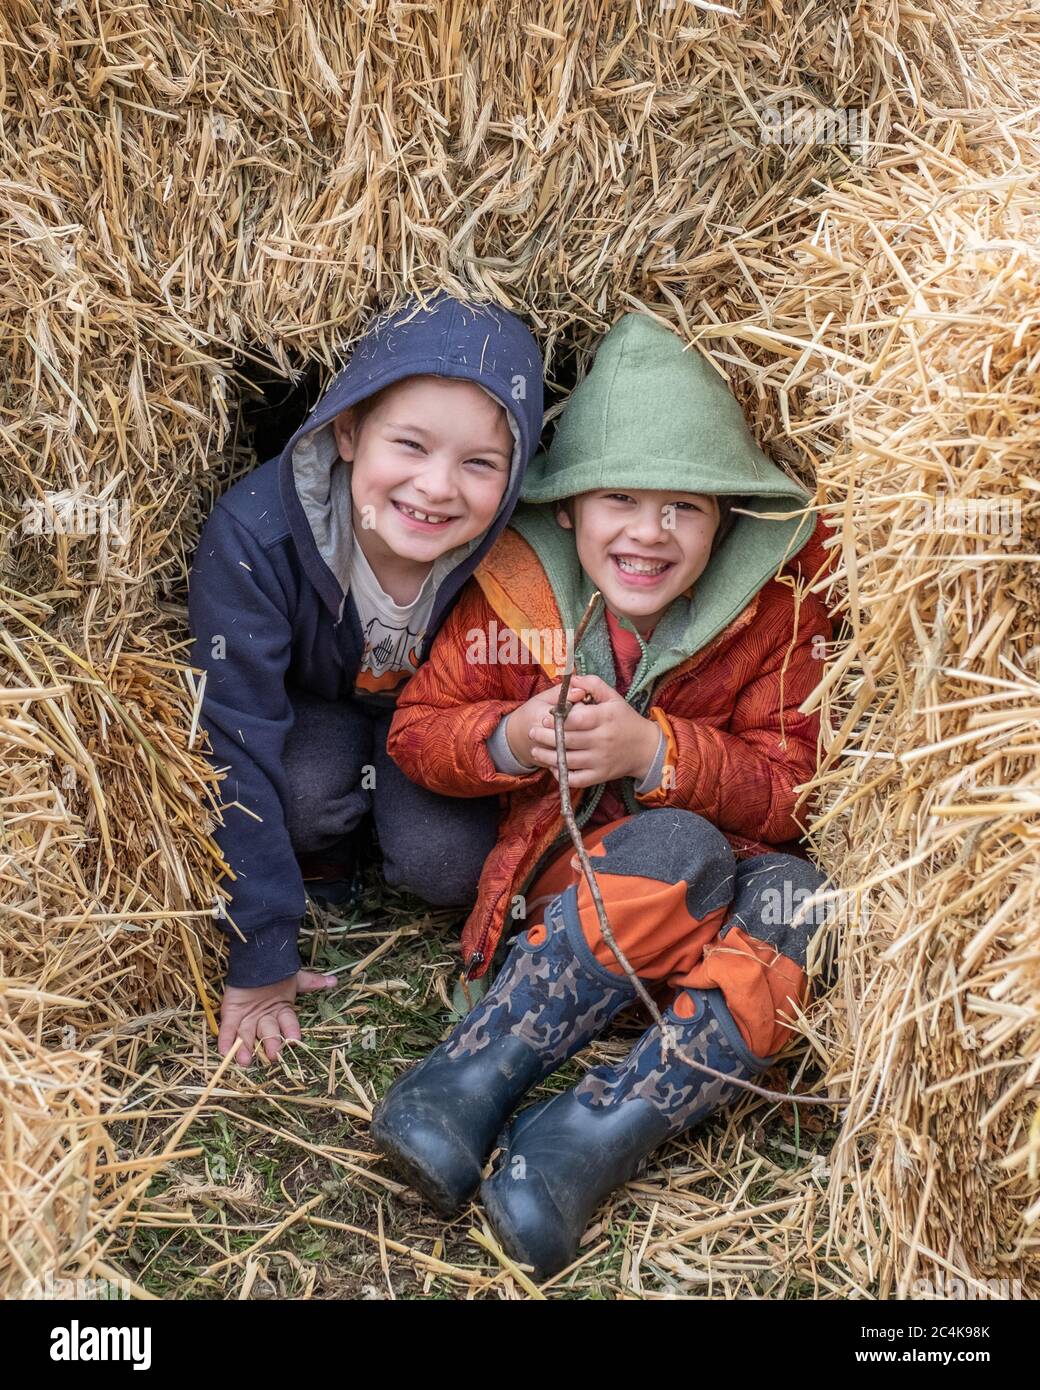 two kids playing in a haystack Stock Photo